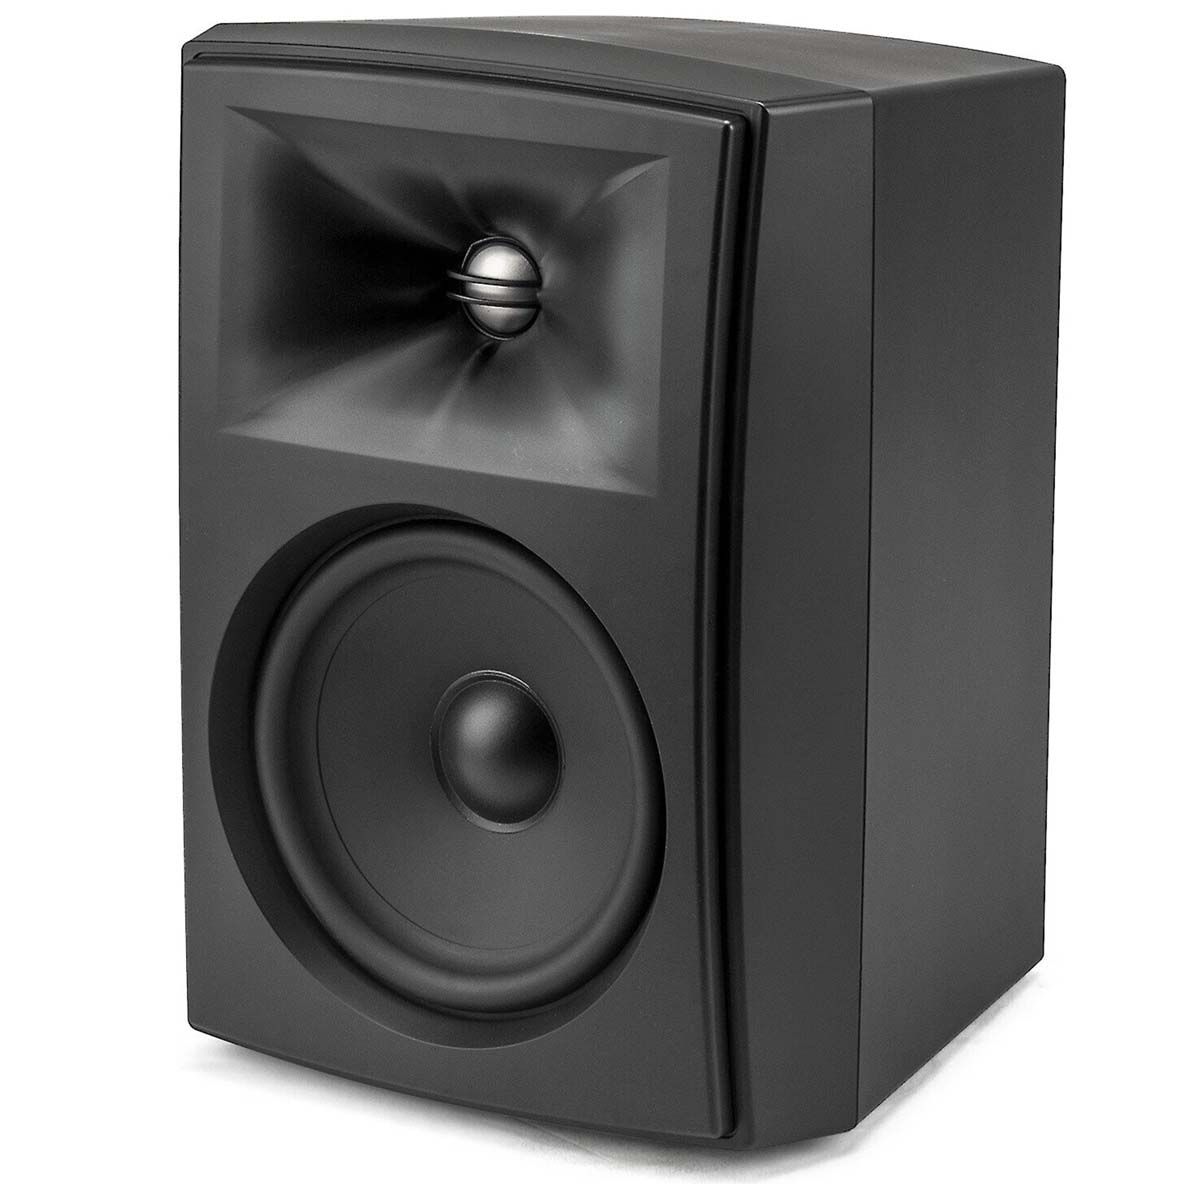 JBL Stage XD-6 6.5" IP67 Rated Outdoor Speakers - Black - Pair - angled front view